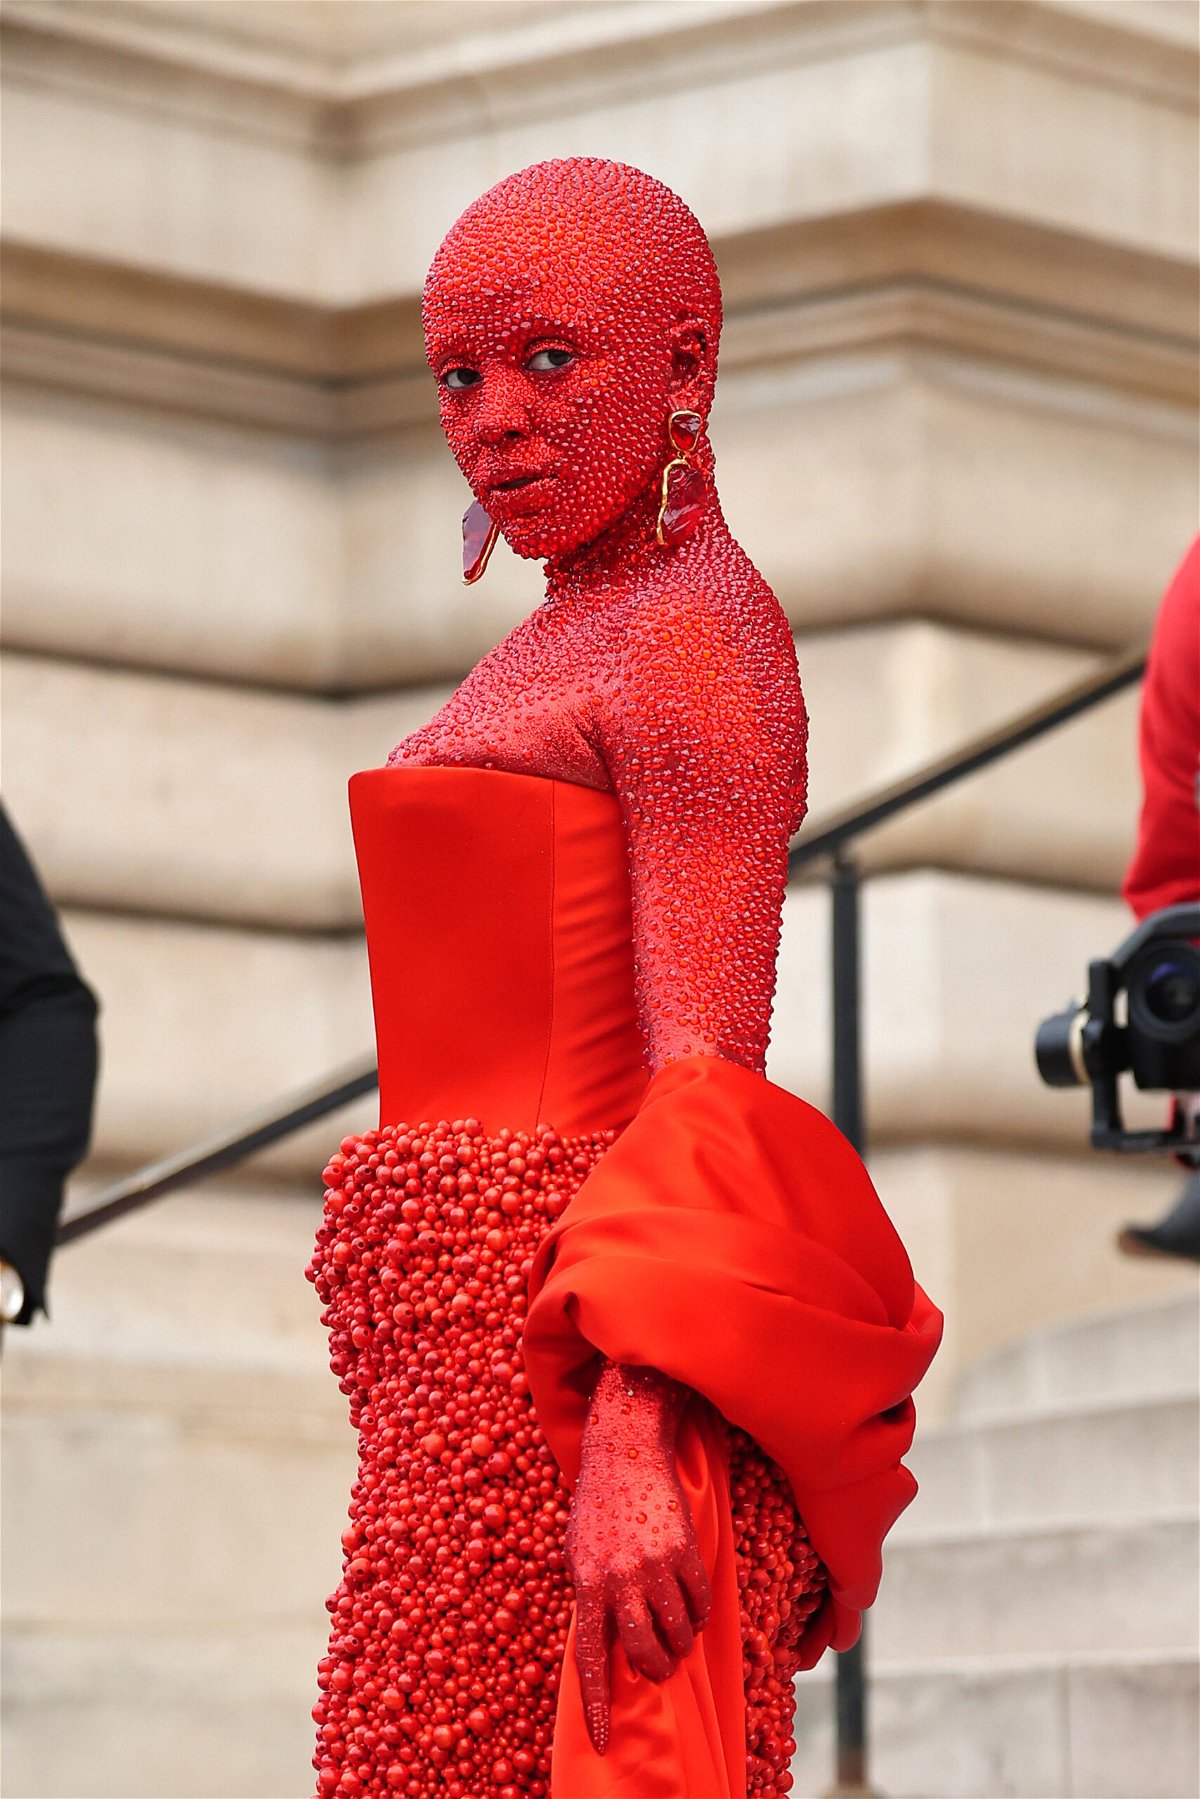 <i>Jacopo Raule/Getty Images</i><br/>Doja Cat attends the Schiaparelli Haute Couture Spring Summer 2023 show as part of Paris Fashion Week on January 23